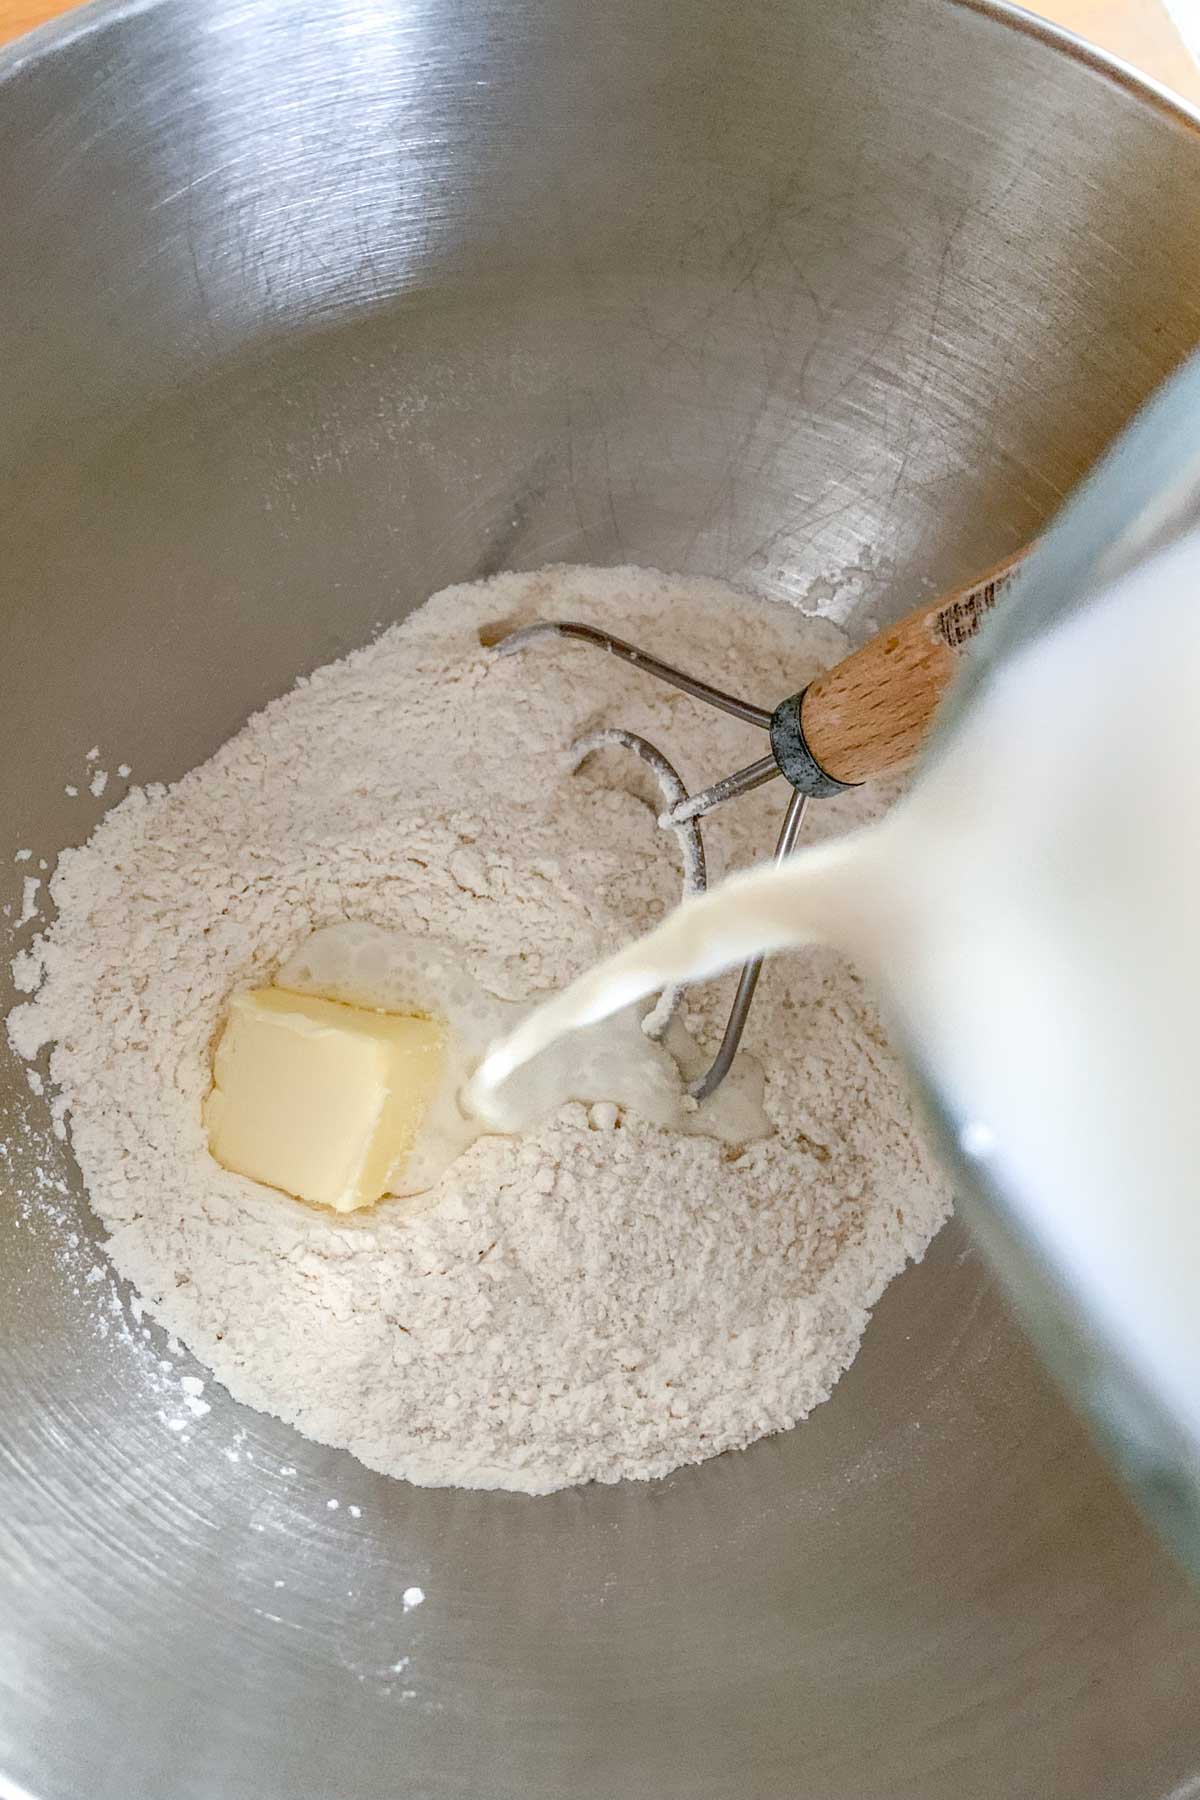 Pouring milk into dry ingredients for dough.